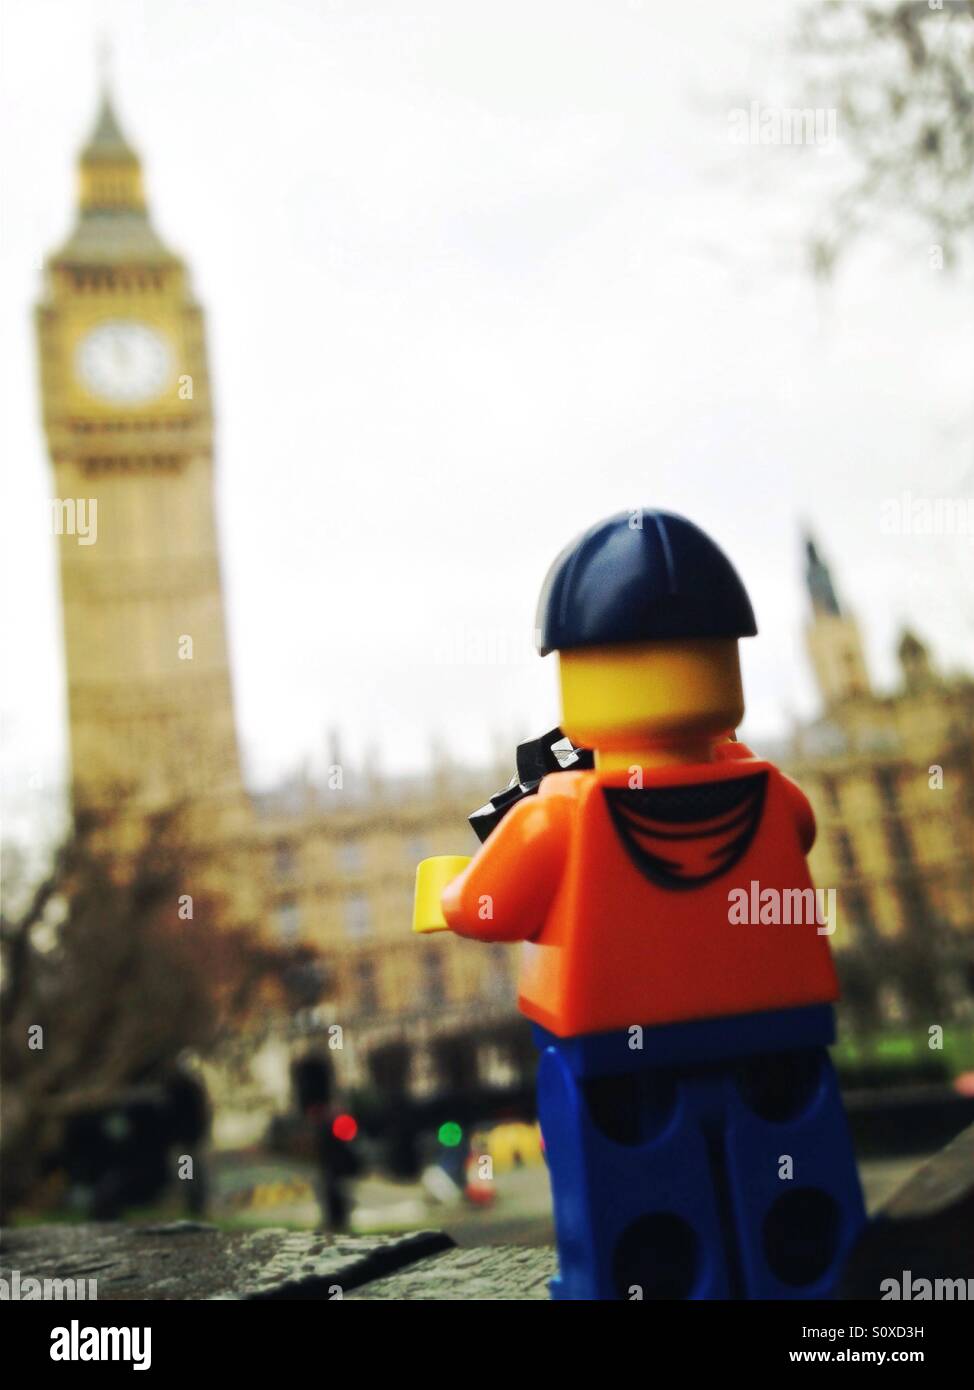 Lego figure taking a picture of the James Tower, Big ben, London, England Stock Photo